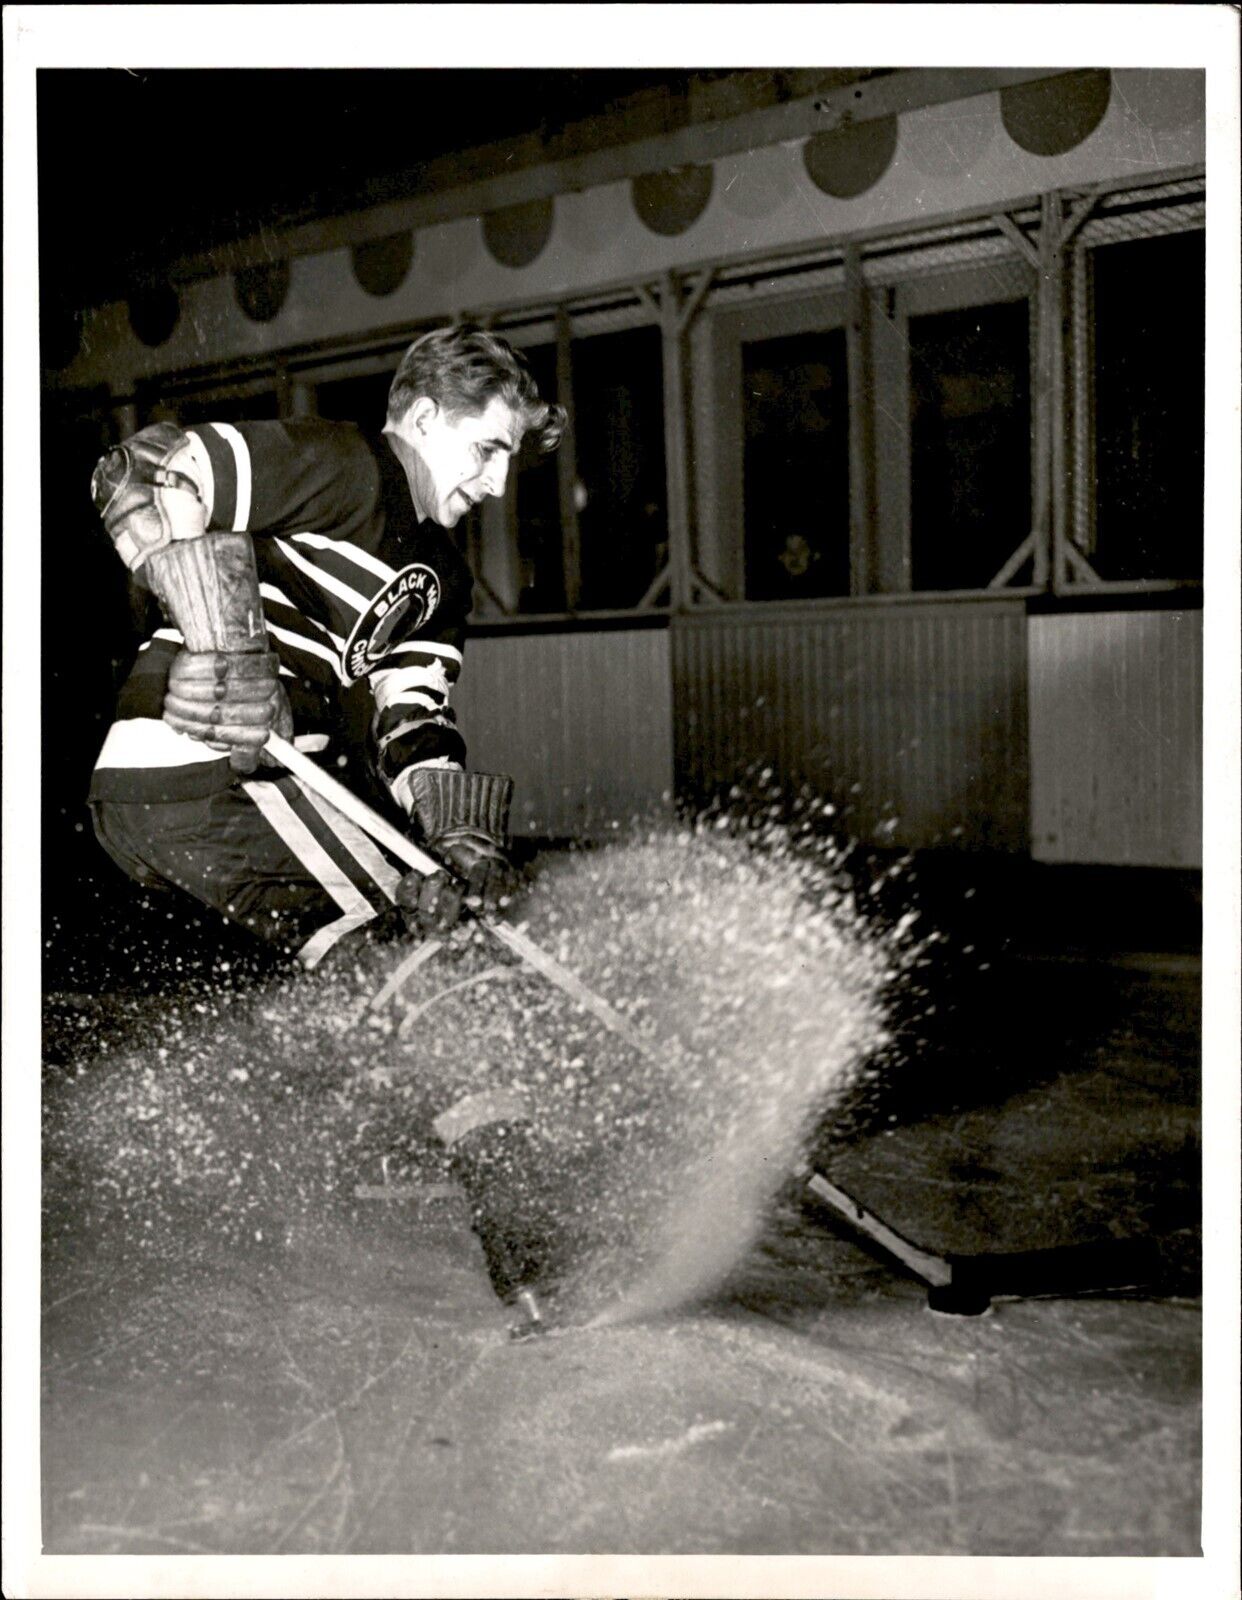 PF5 Original Photo DON GROSSO TRADED TO CHICAGO BLACK HAWKS DETROIT RED WINGS